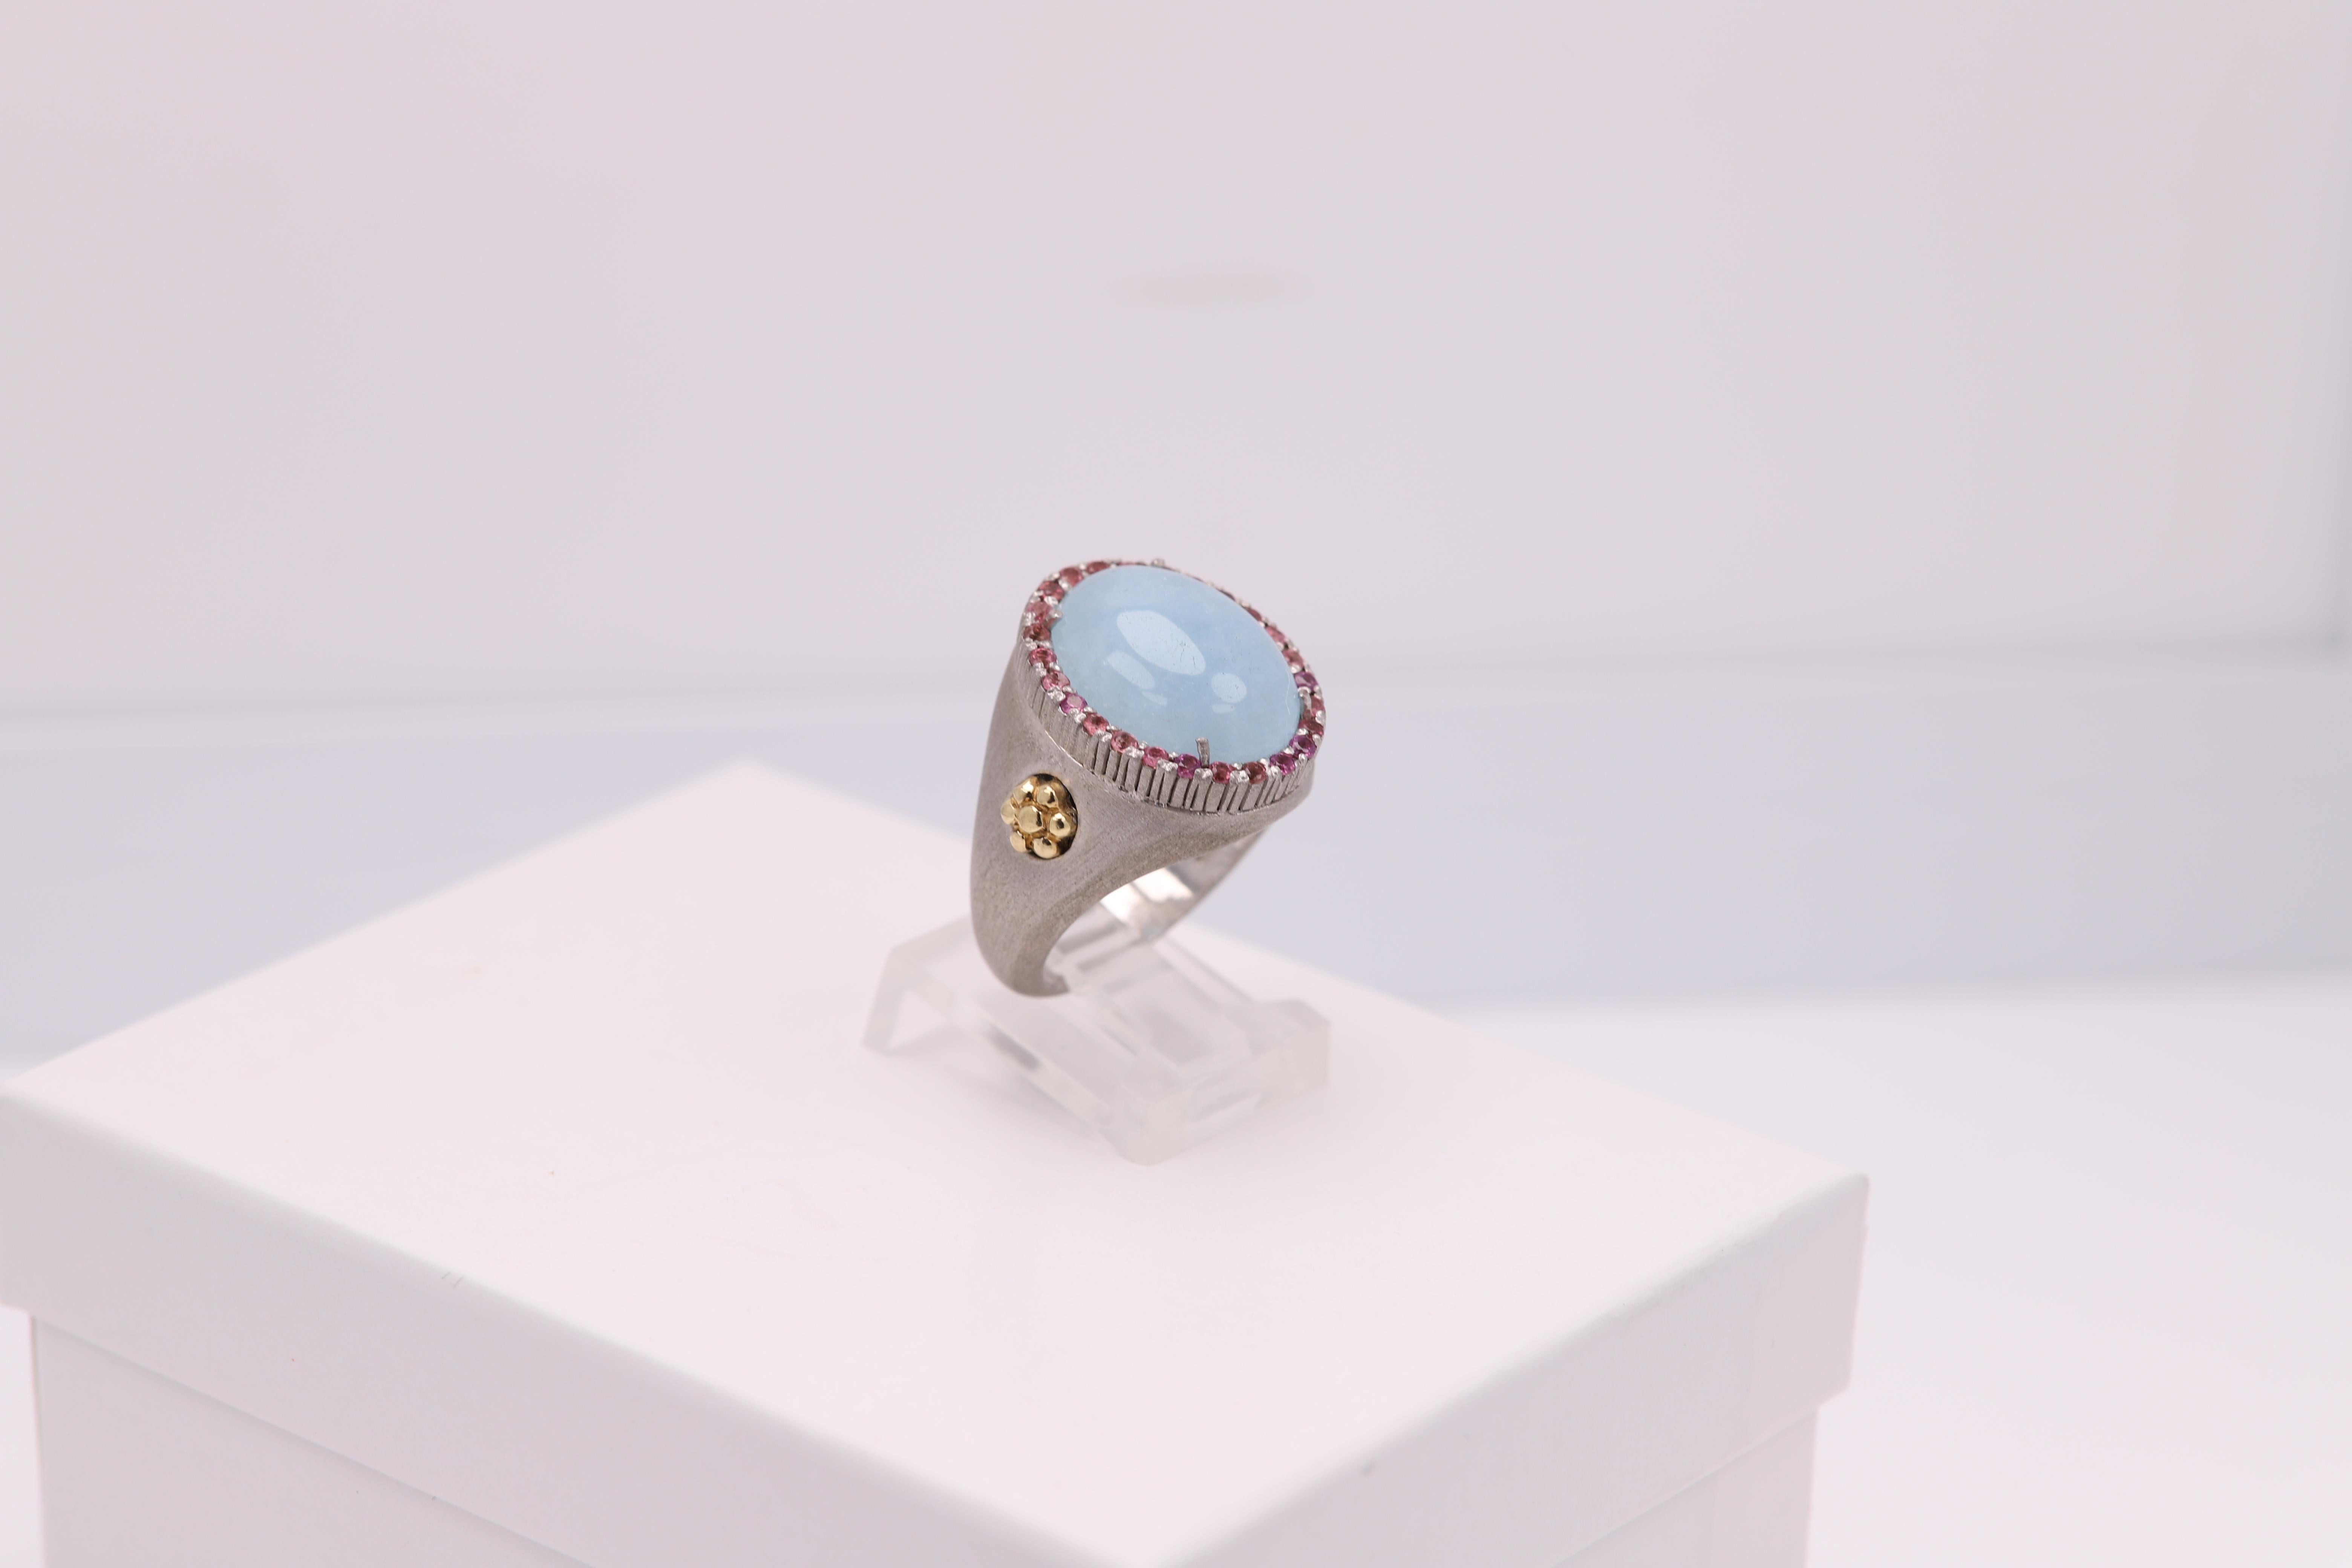 Vintage Ring with a Brilliant Aquamarine stone
and small pink Tourmaline  stones - all natural.
Aquamarine is Cabochon cut.
Approx size 16 x 12 mm
Well craftsmanship - made in Italy
Mostly Sterling Silver 925 and the side flowers are solid 18k